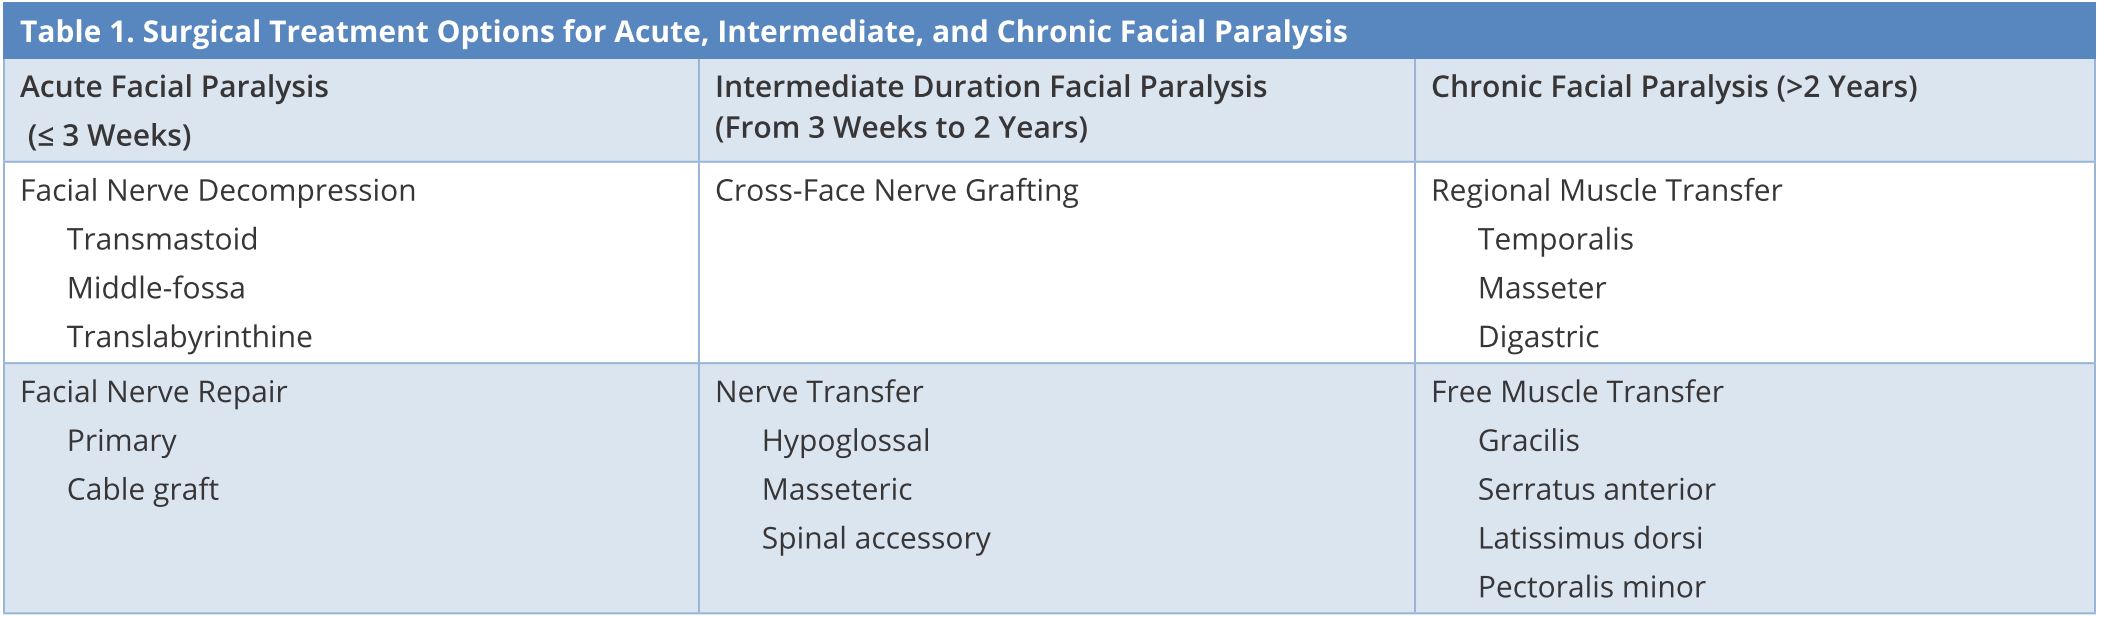 Table 1.JPGSurgical treatment options for acute, intermediate, and chronic facial paralysis.